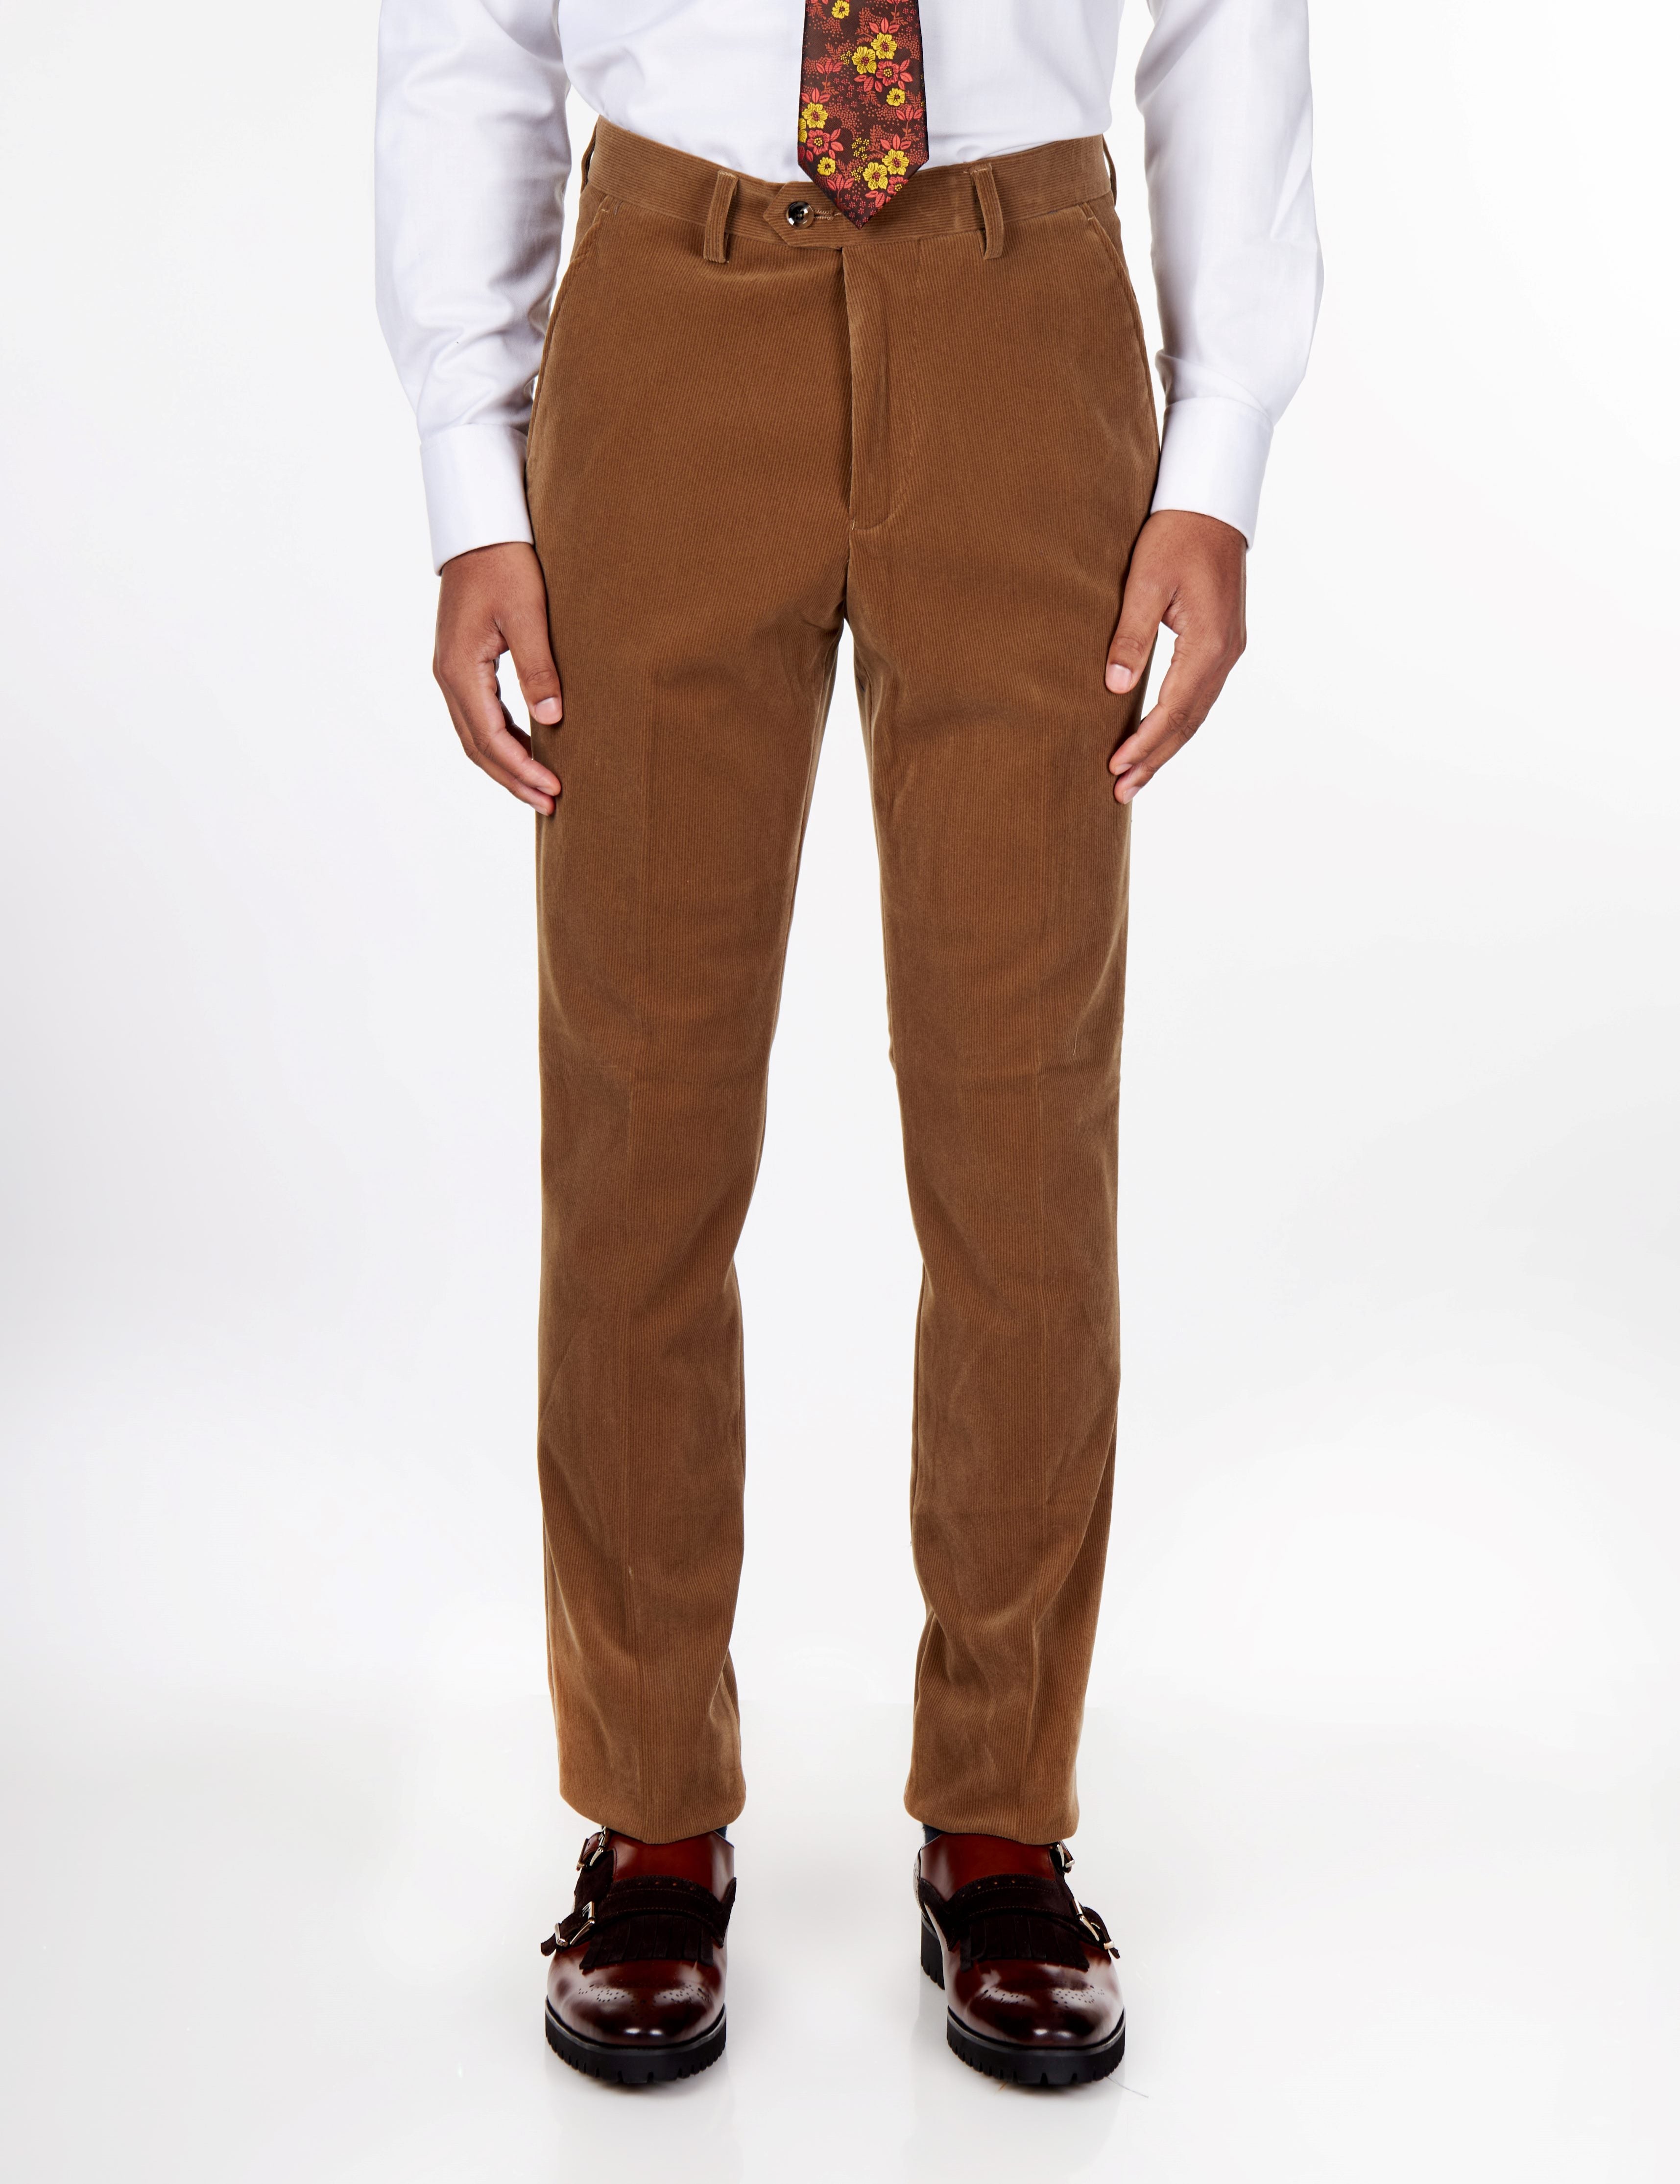 CORDUORY TAILORED FIT SUIT IN TAN